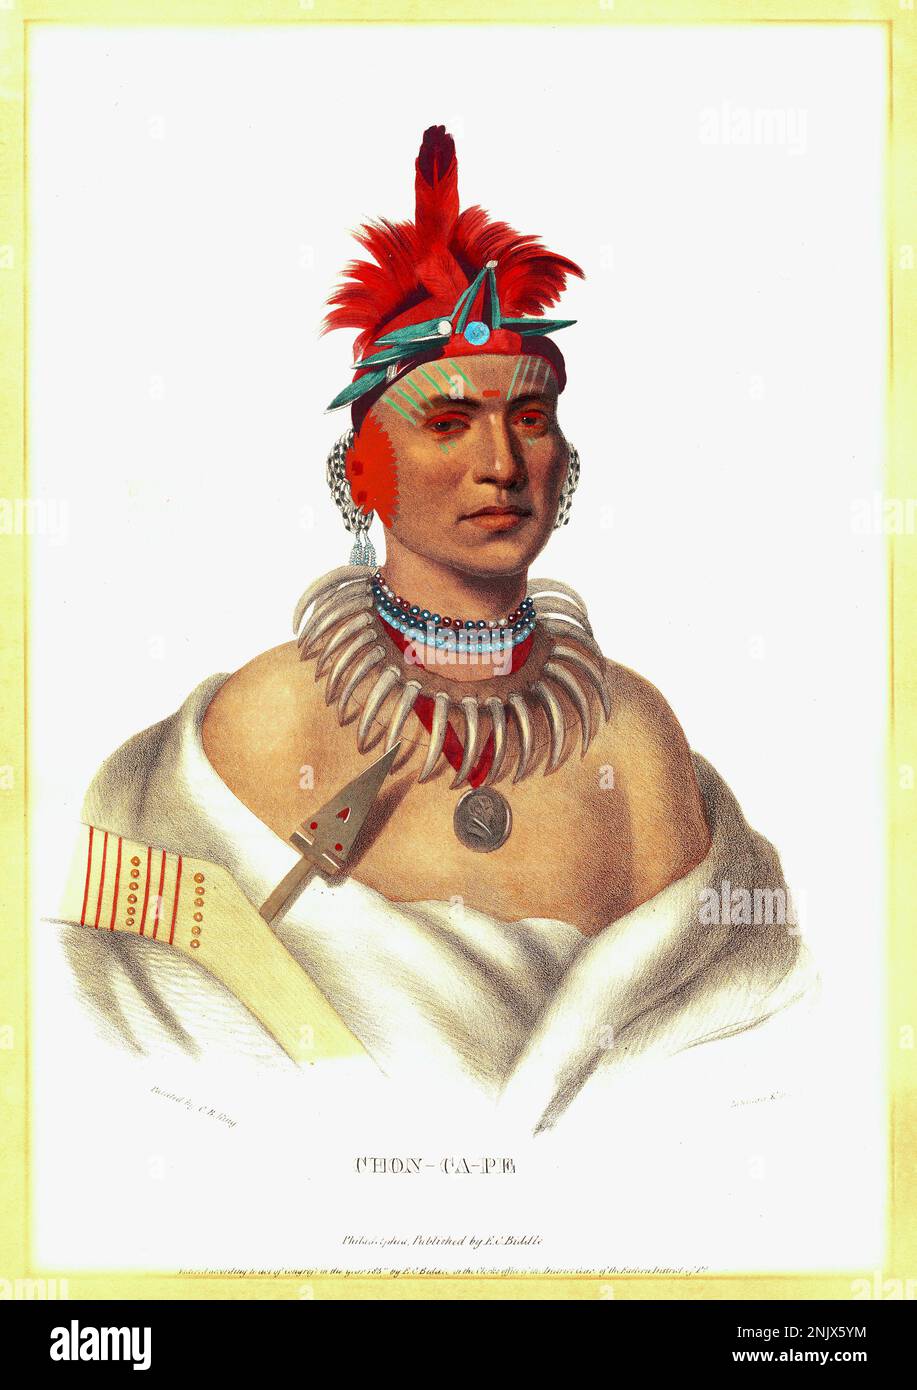 Chon-Ca-Pe - 1837 - Painted by Charles Bird King Stock Photo